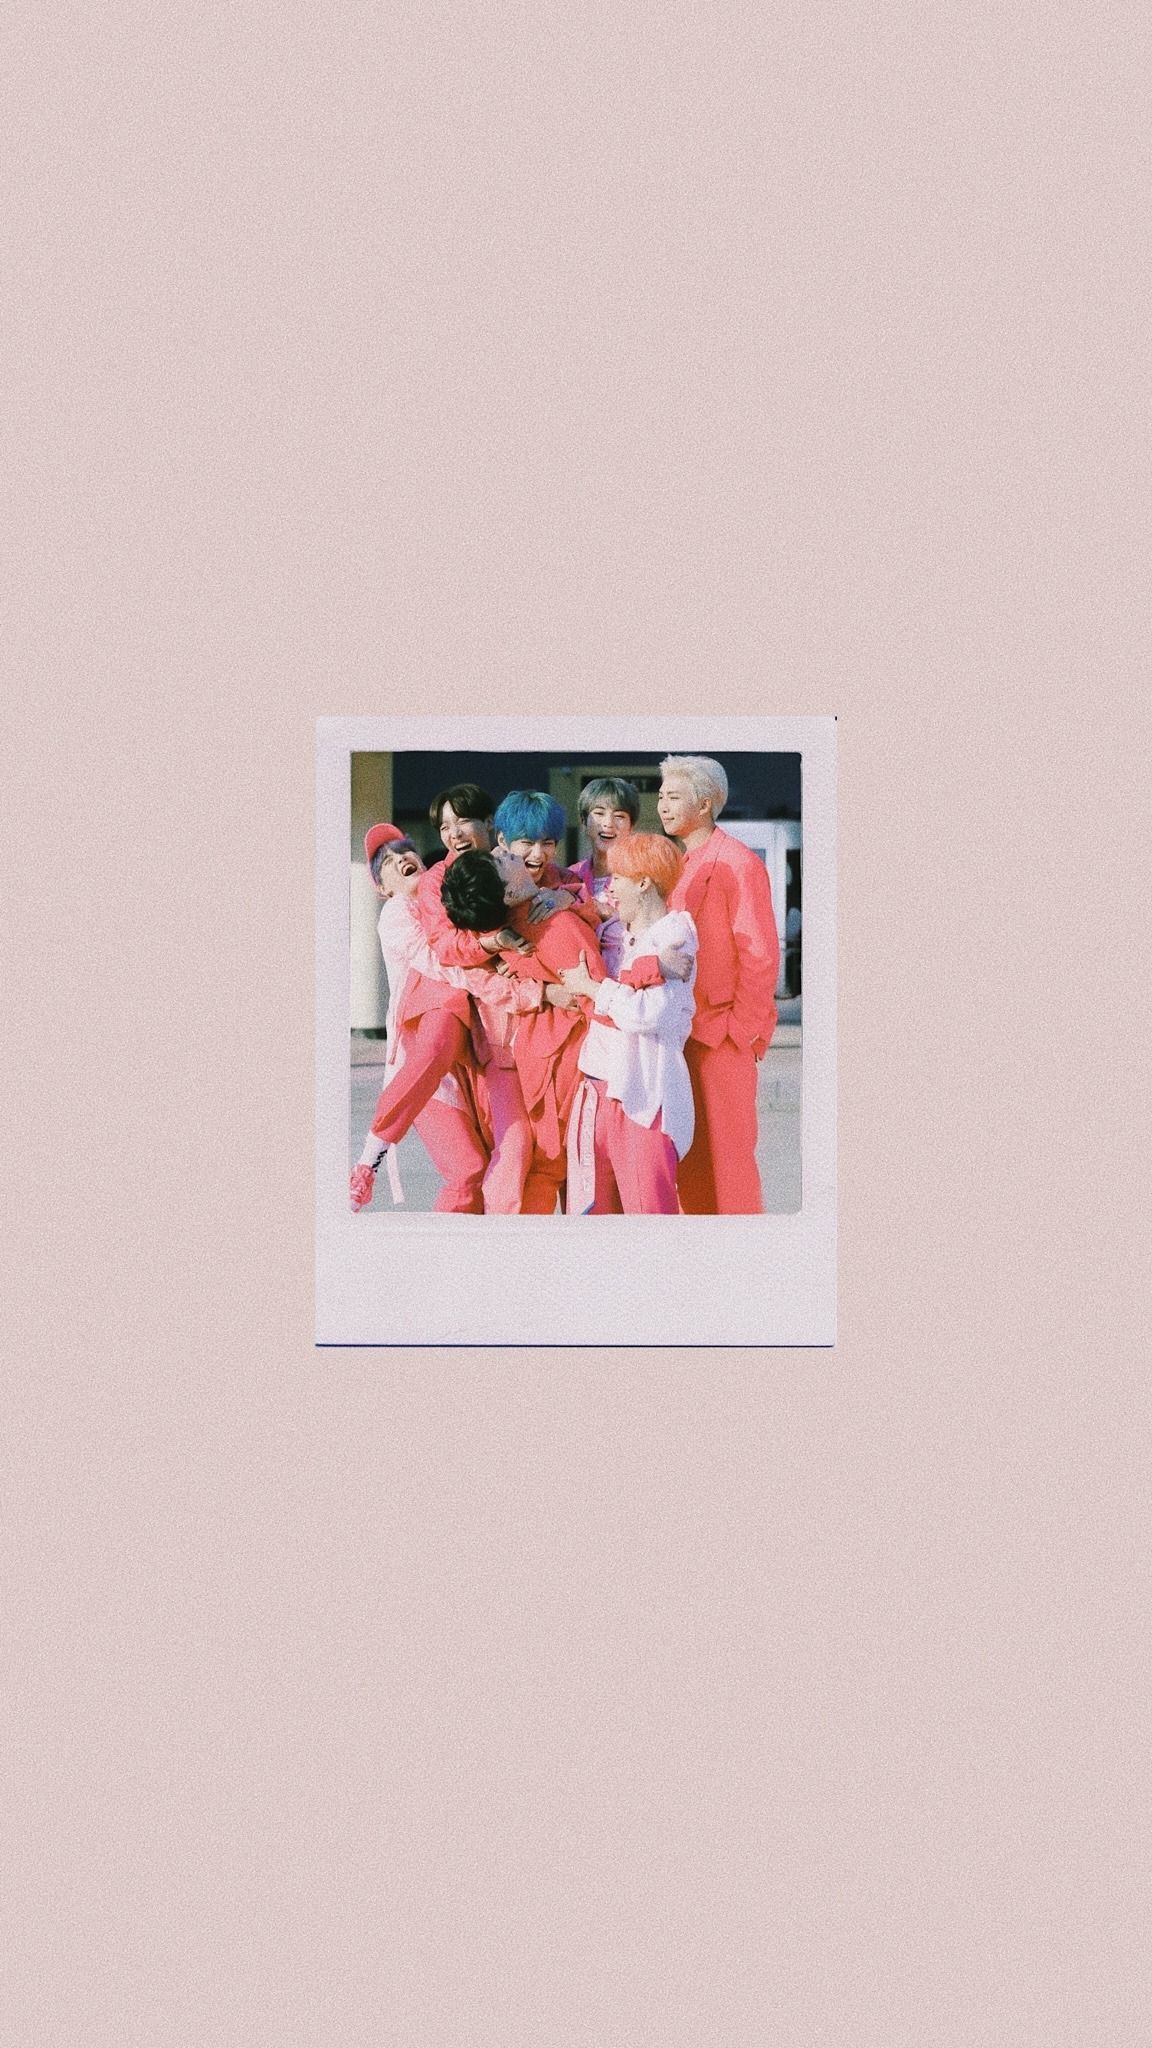 Polaroid picture of the members of BTS in pink outfits - Polaroid